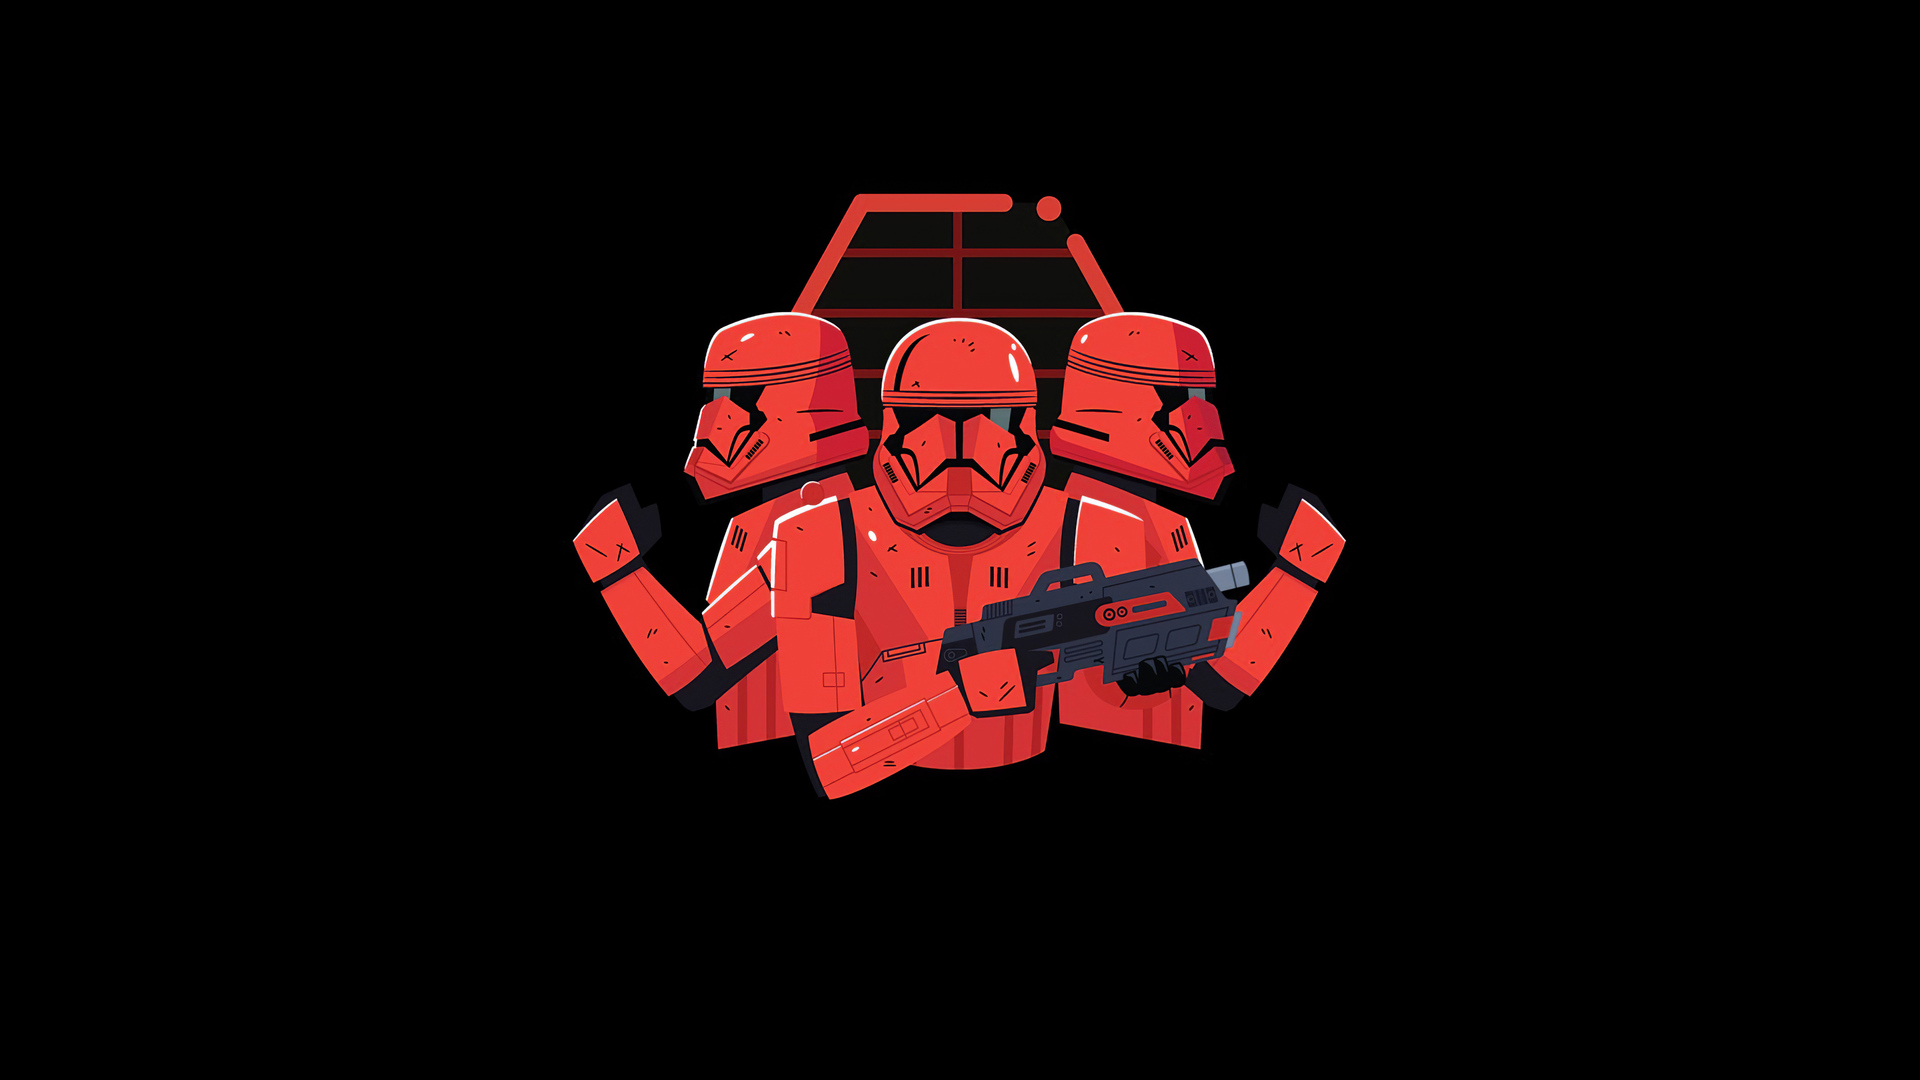 1920x1080 Star Wars Stormtrooper Minimal Art Laptop Full Hd 1080p Hd 4k Wallpapers Images Backgrounds Photos And Pictures